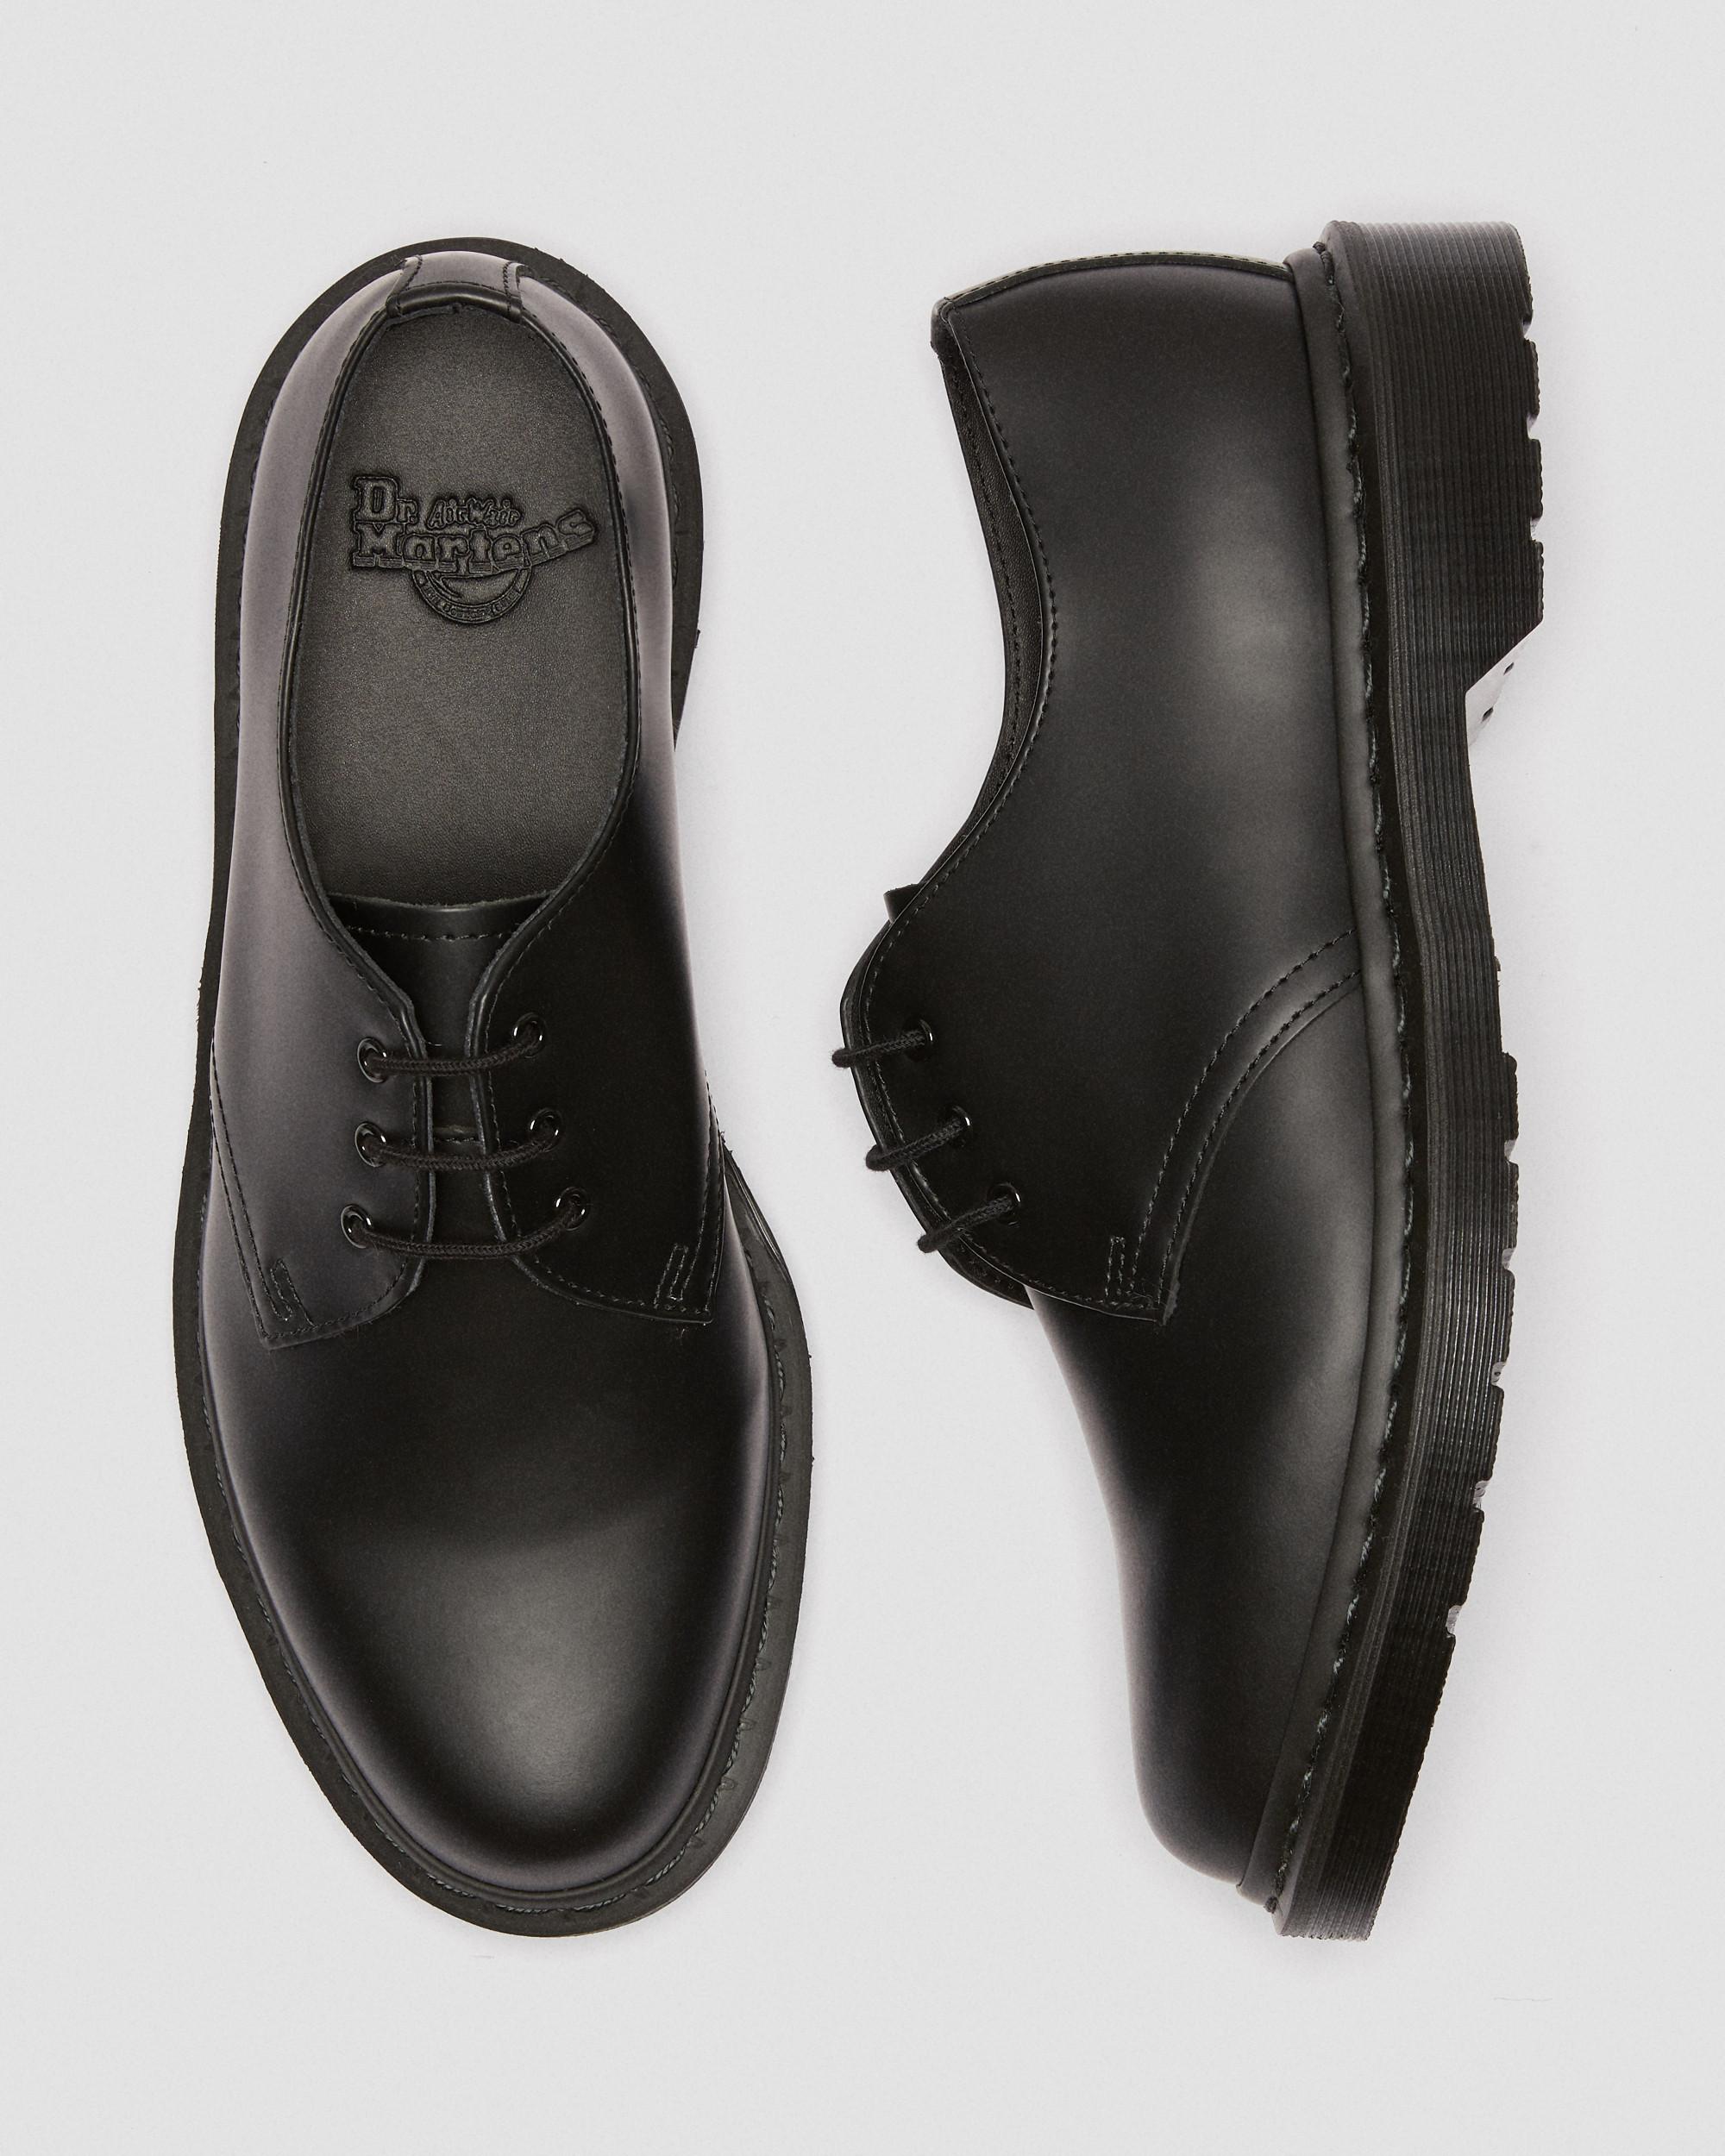 DR MARTENS 1461 Mono Smooth Leather Oxford Shoes